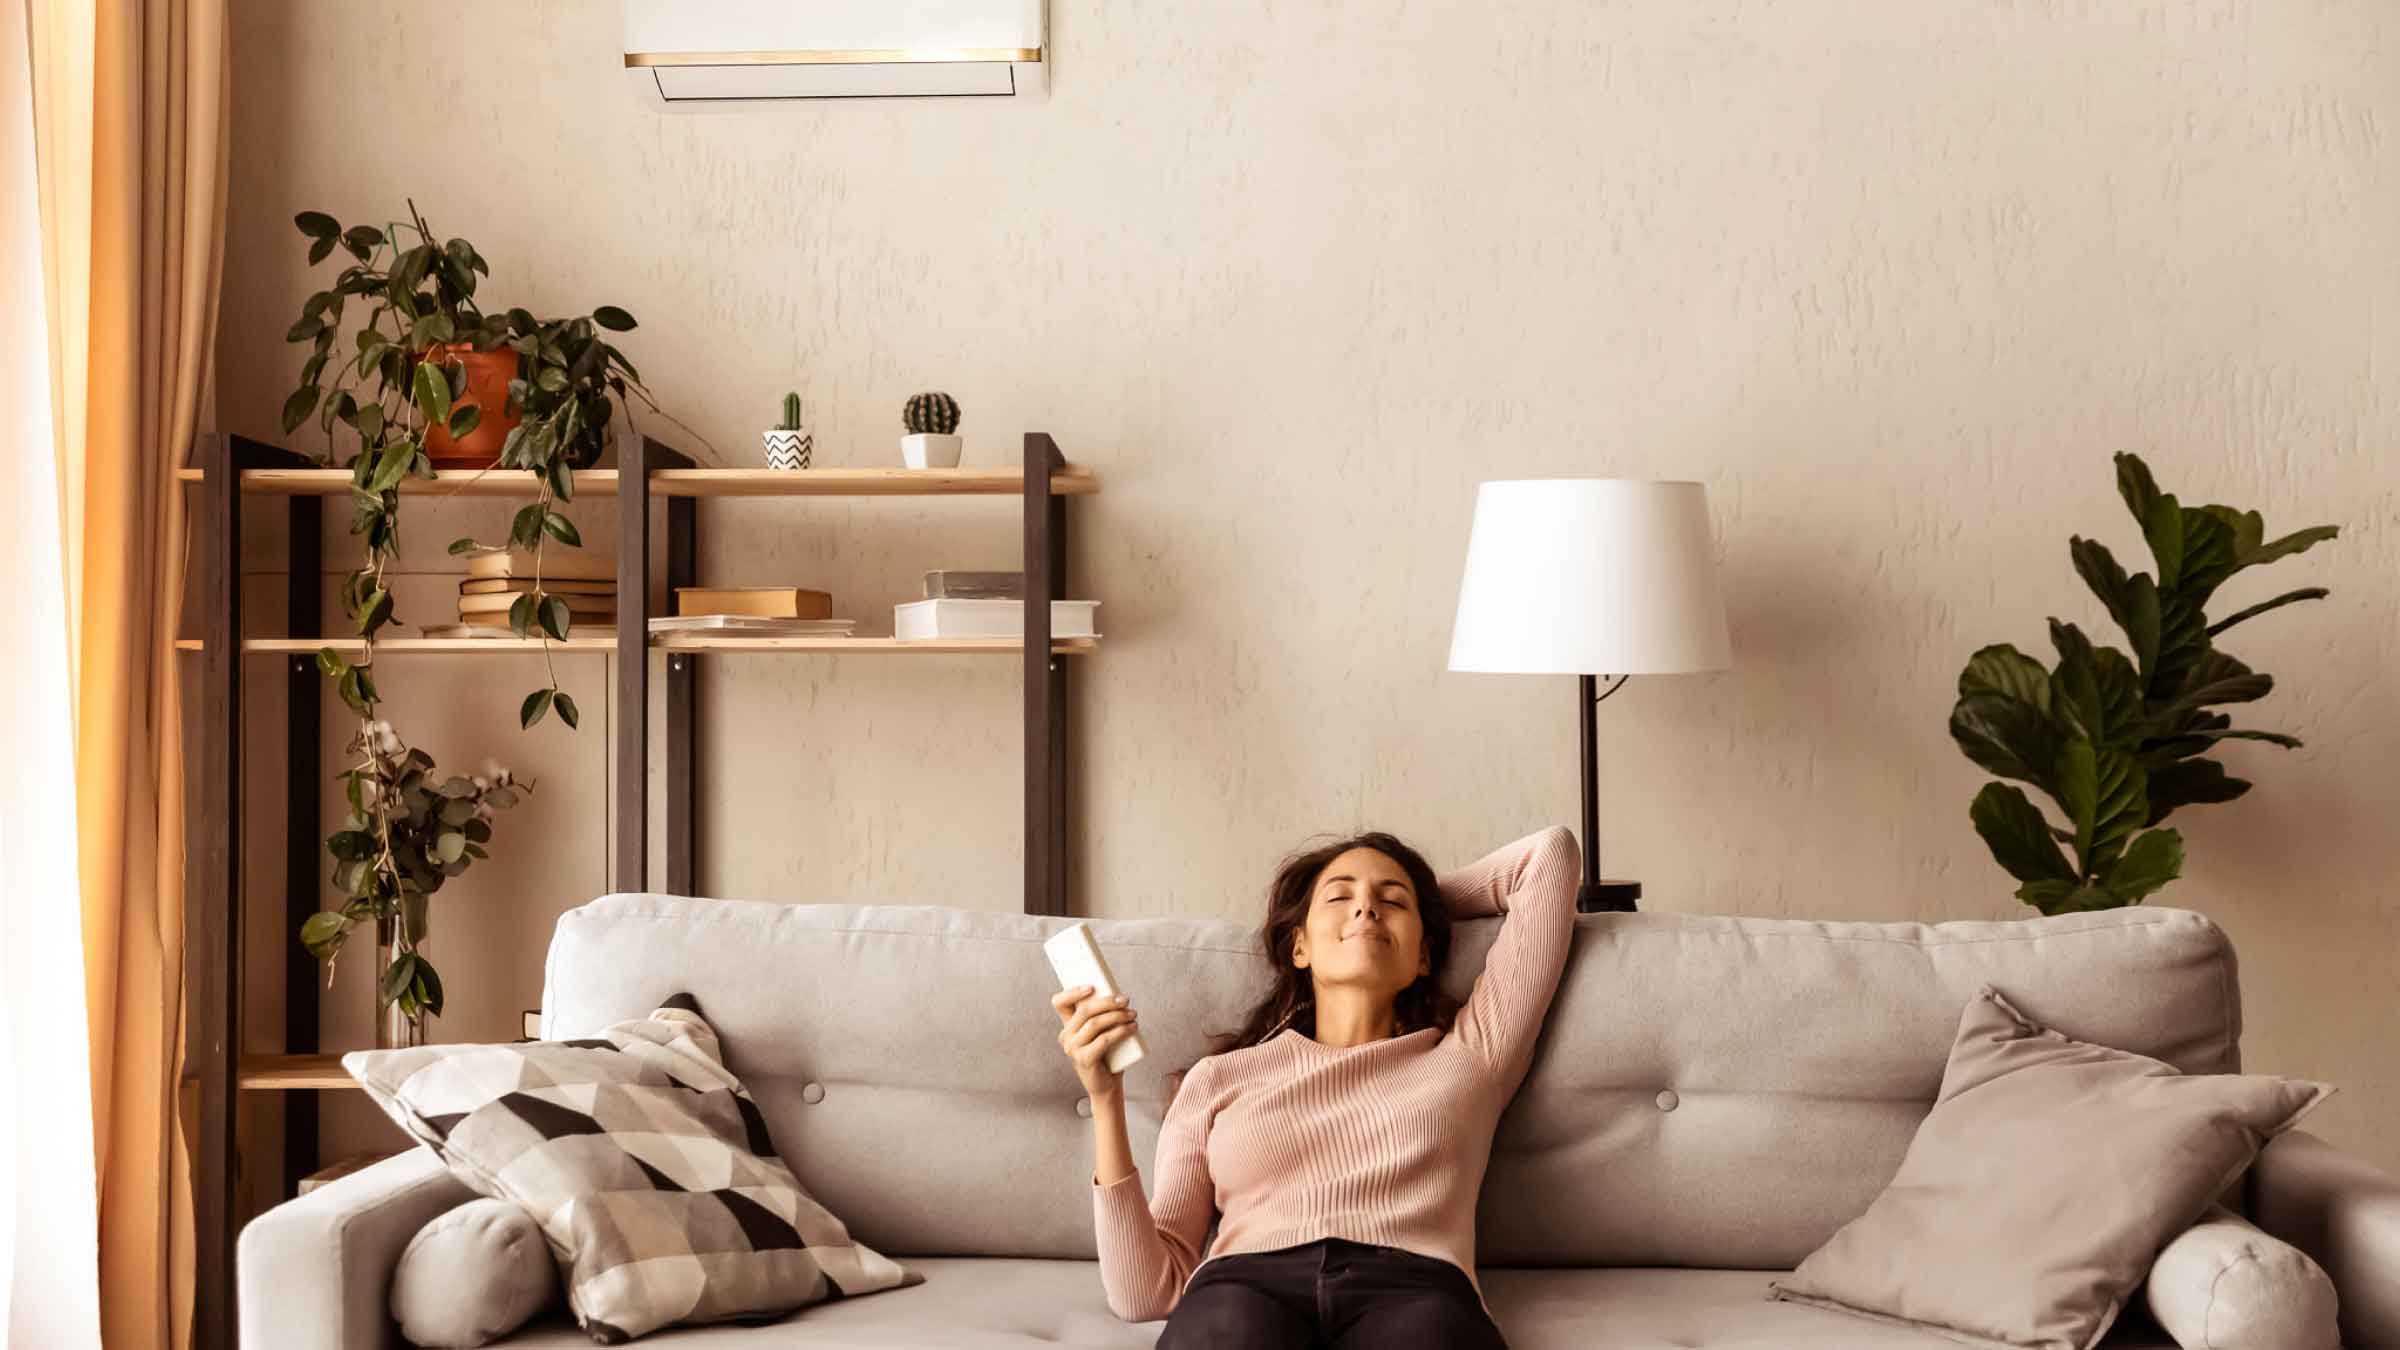 Woman relaxes back on sofa, one arm behind her head the other holds remote control pointed toward air conditioner.